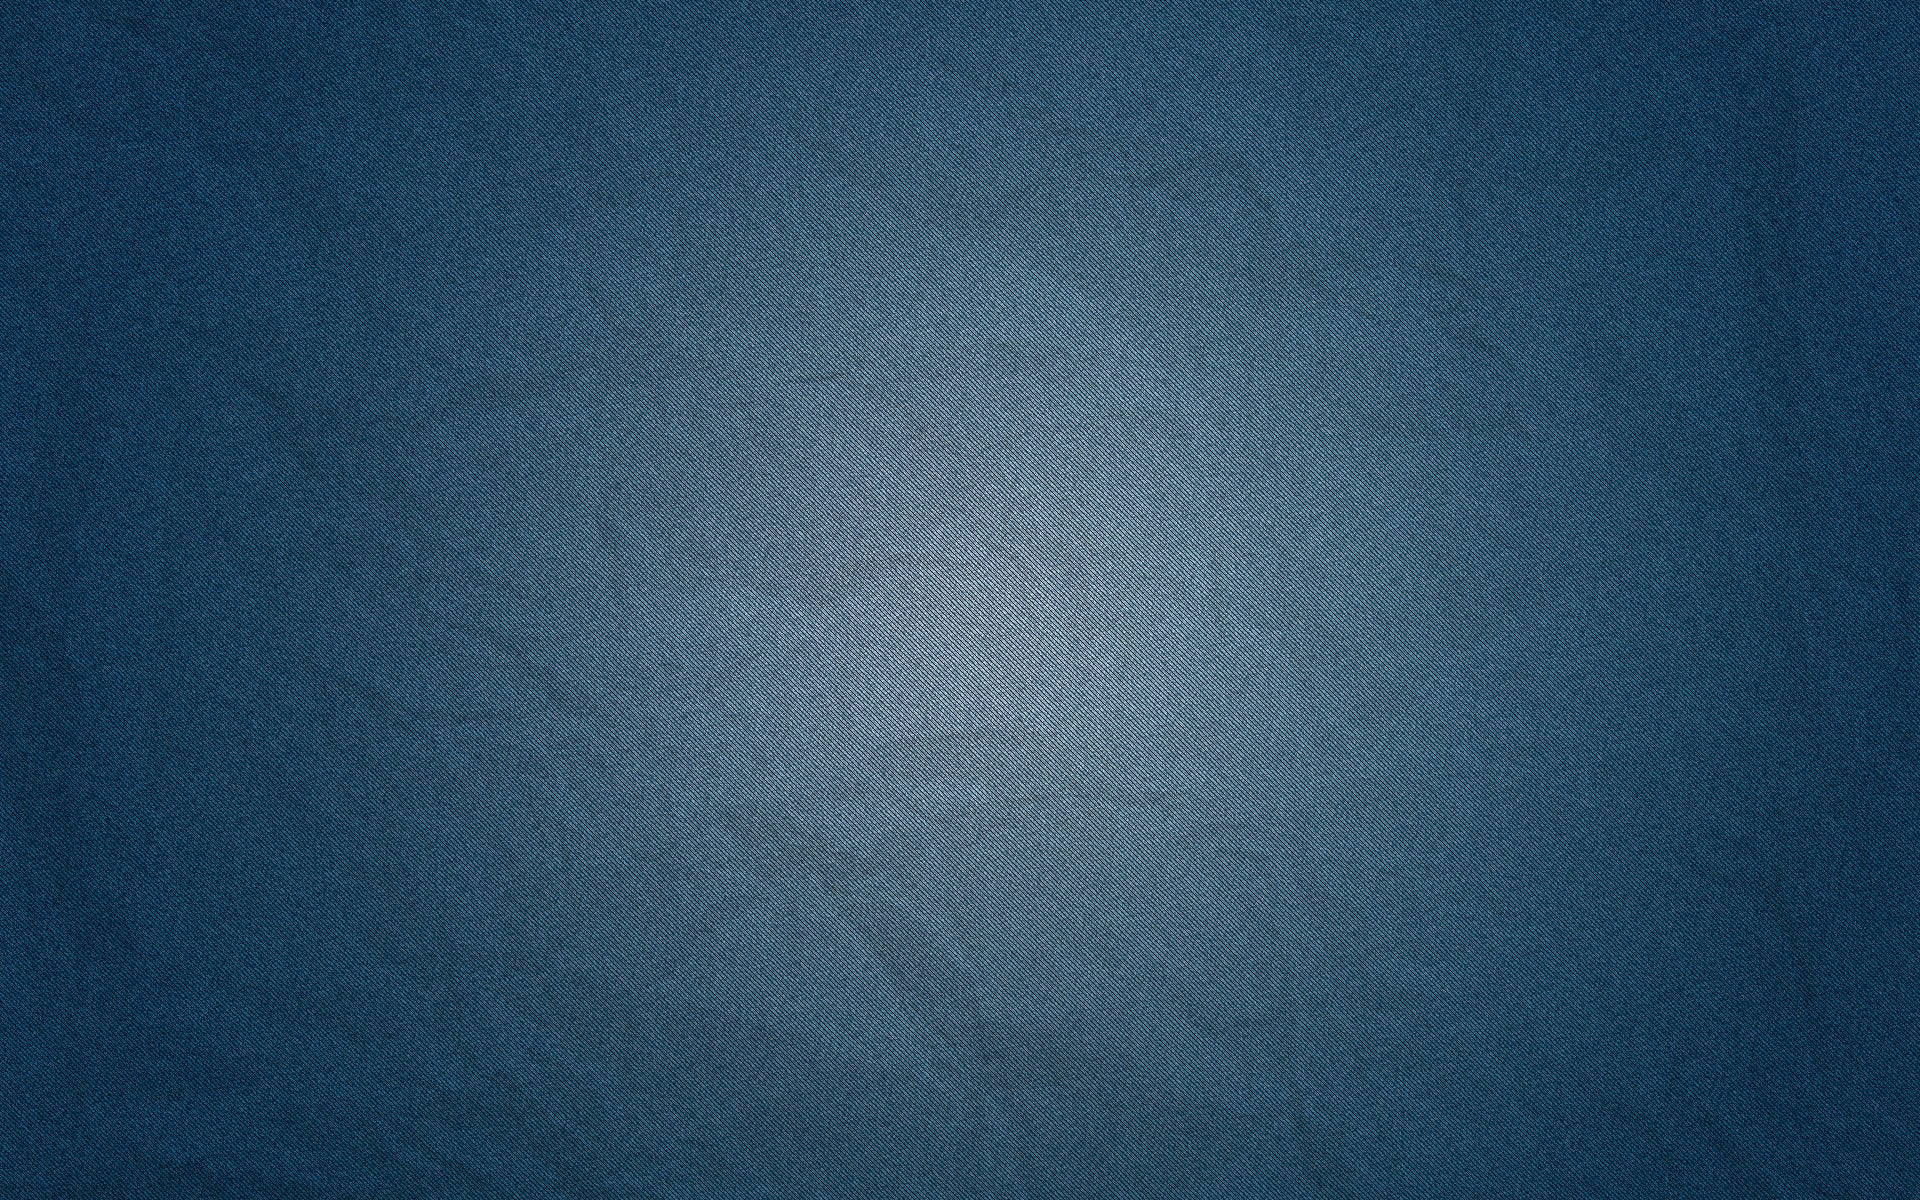 Textured Blue Gradient Backgrounds Picture